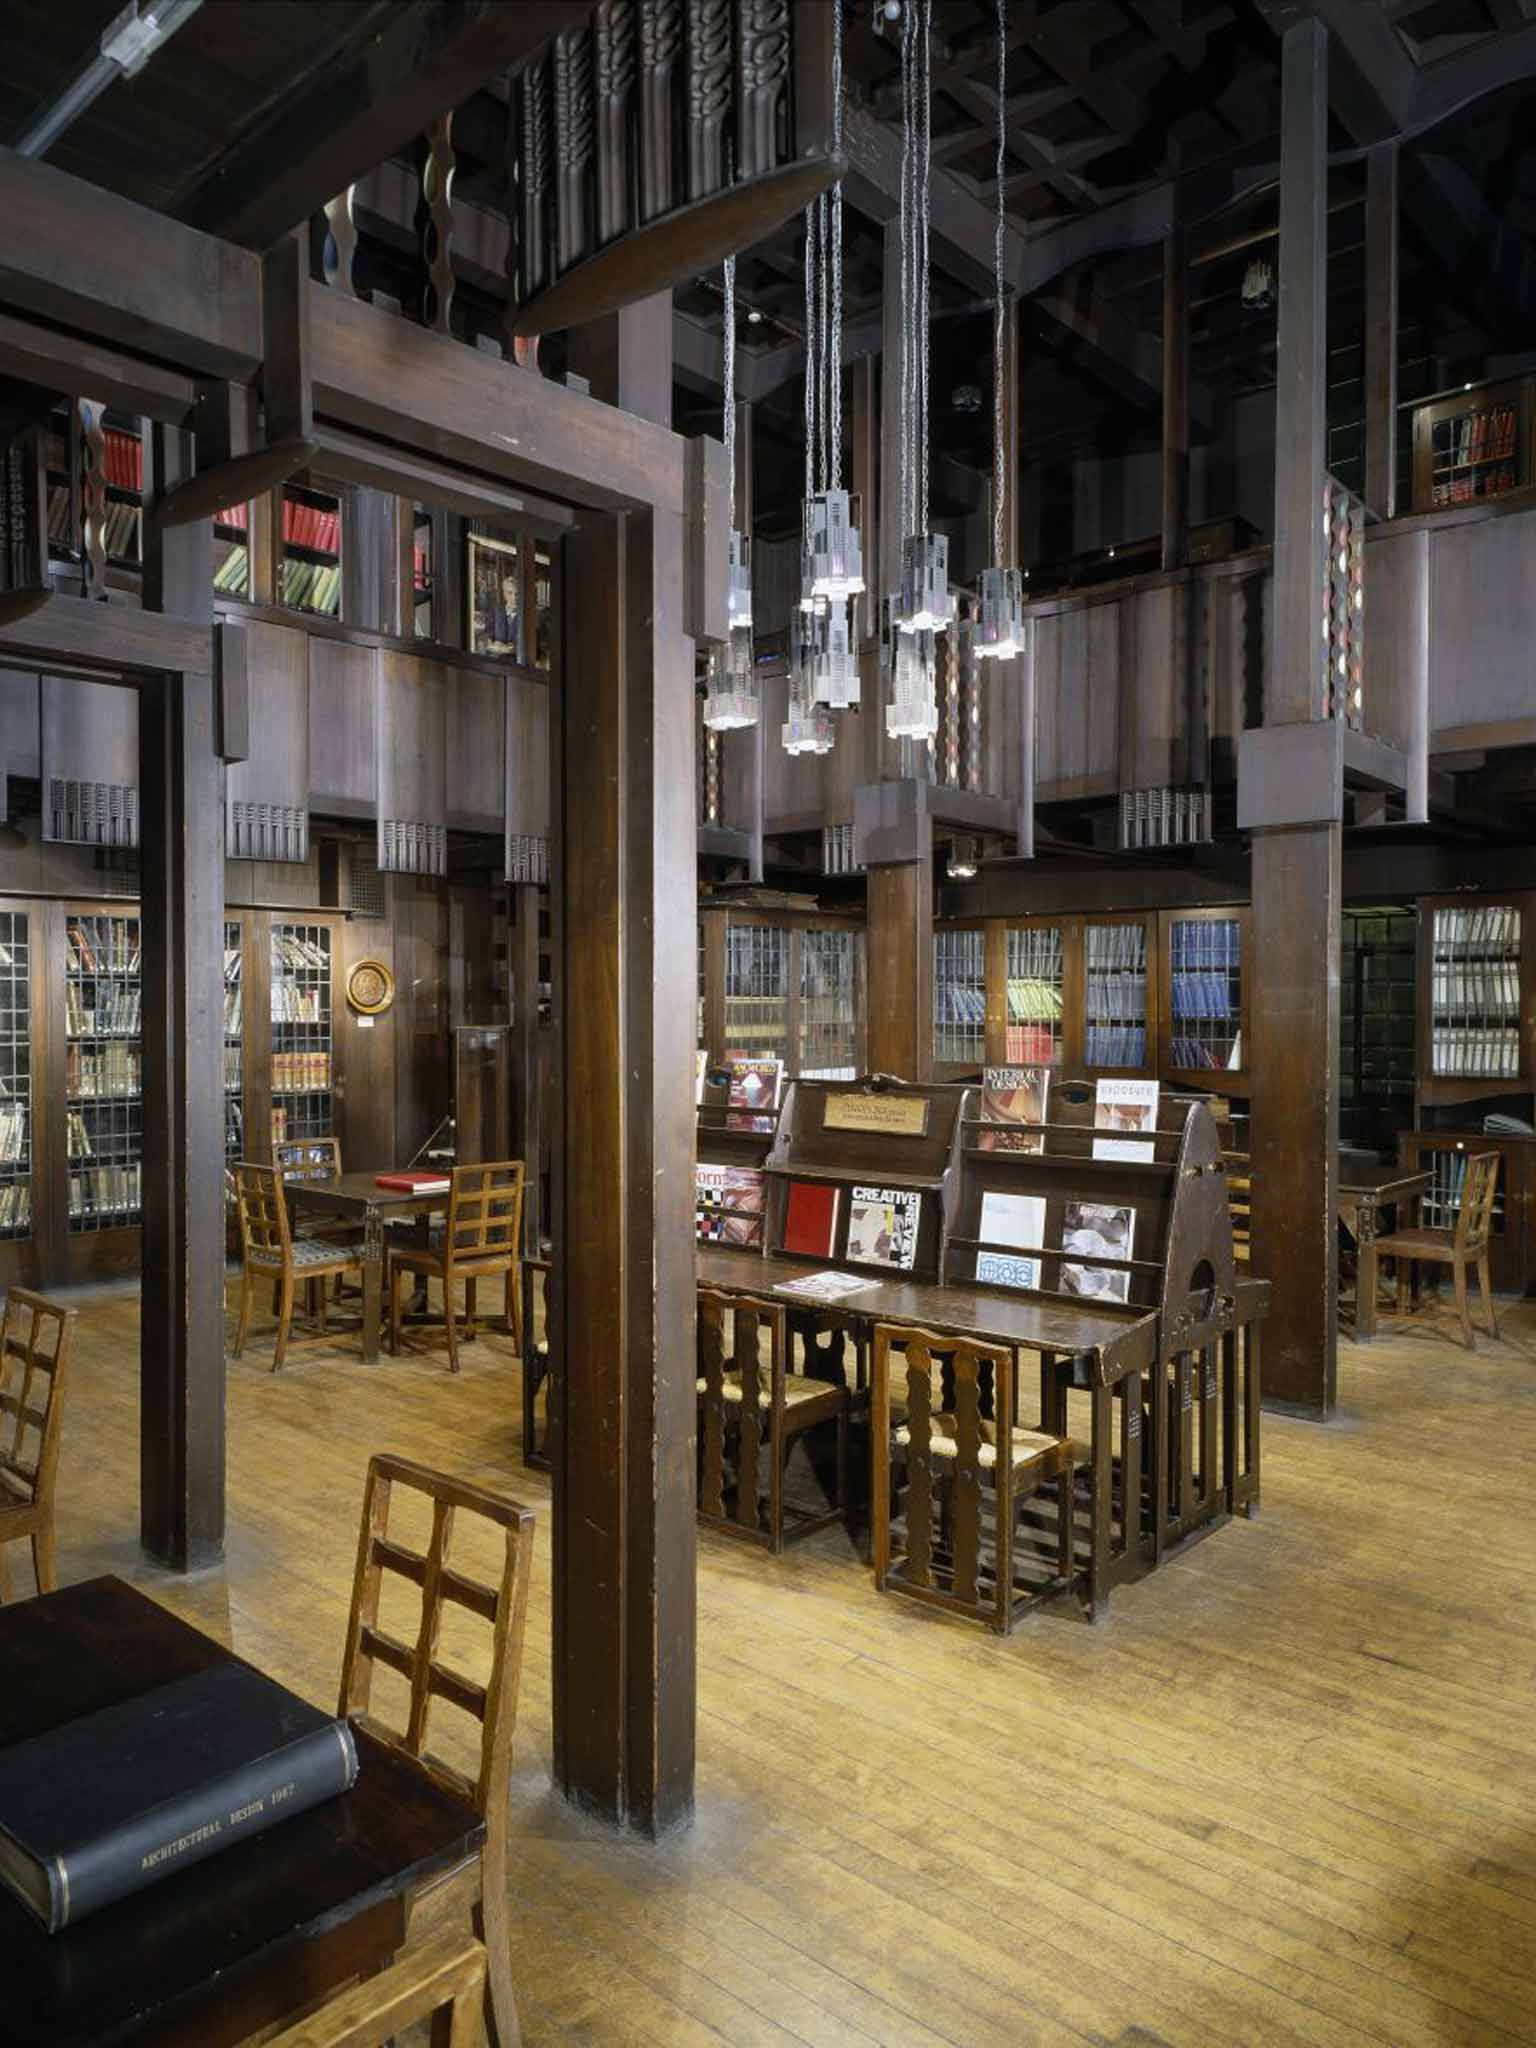 The Library at the Glasgow School of Art, before the fire